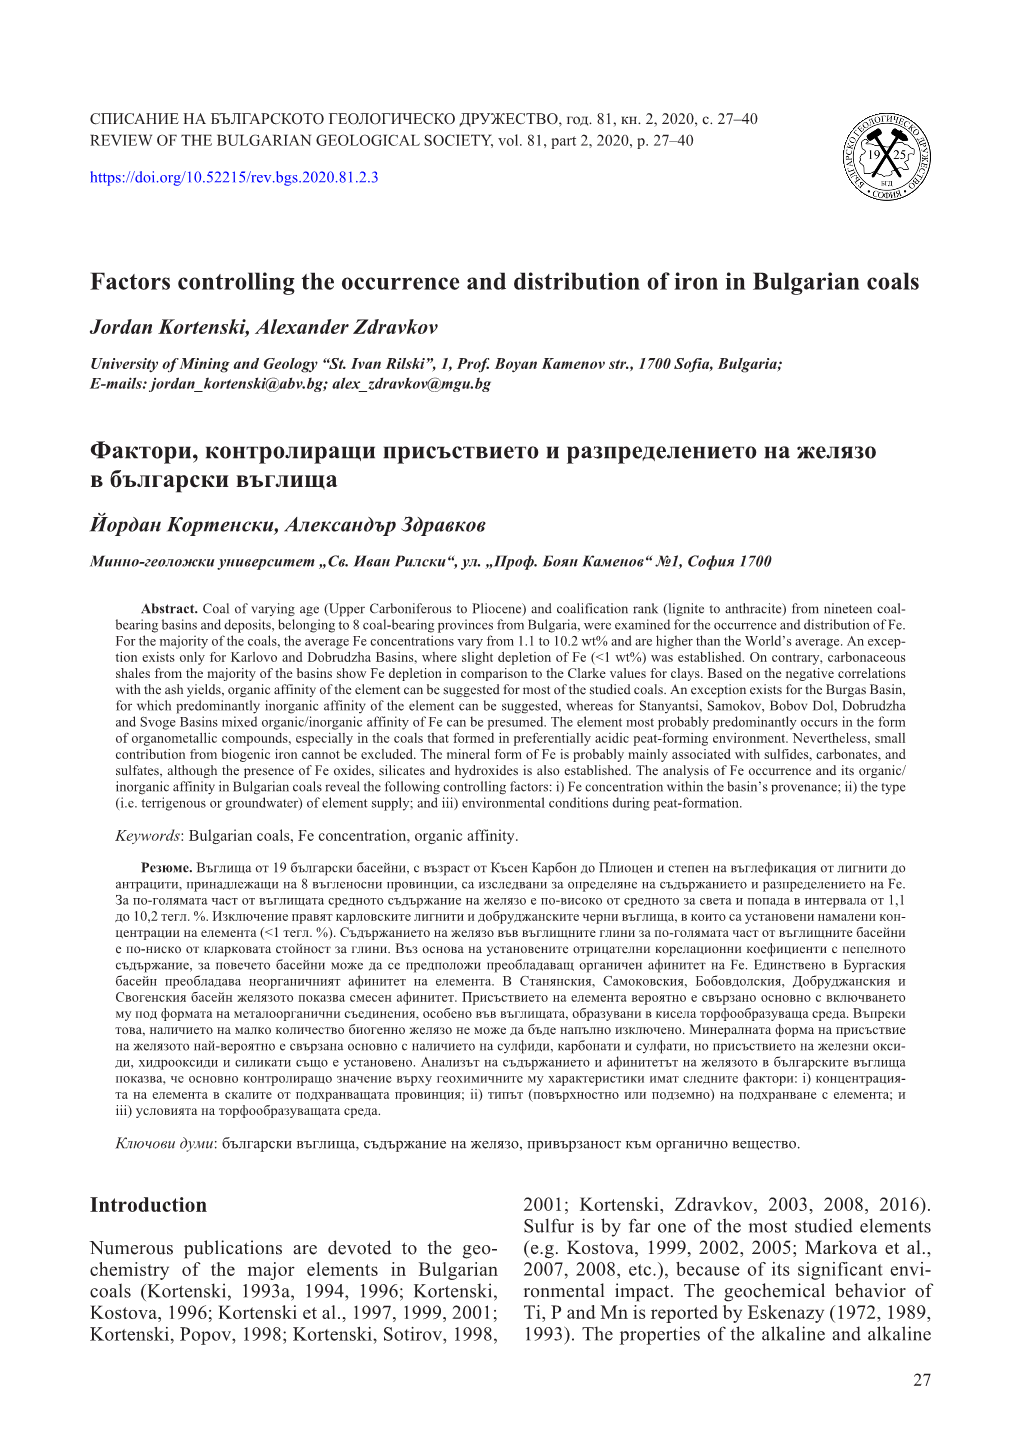 Factors Controlling the Occurrence and Distribution of Iron in Bulgarian Coals